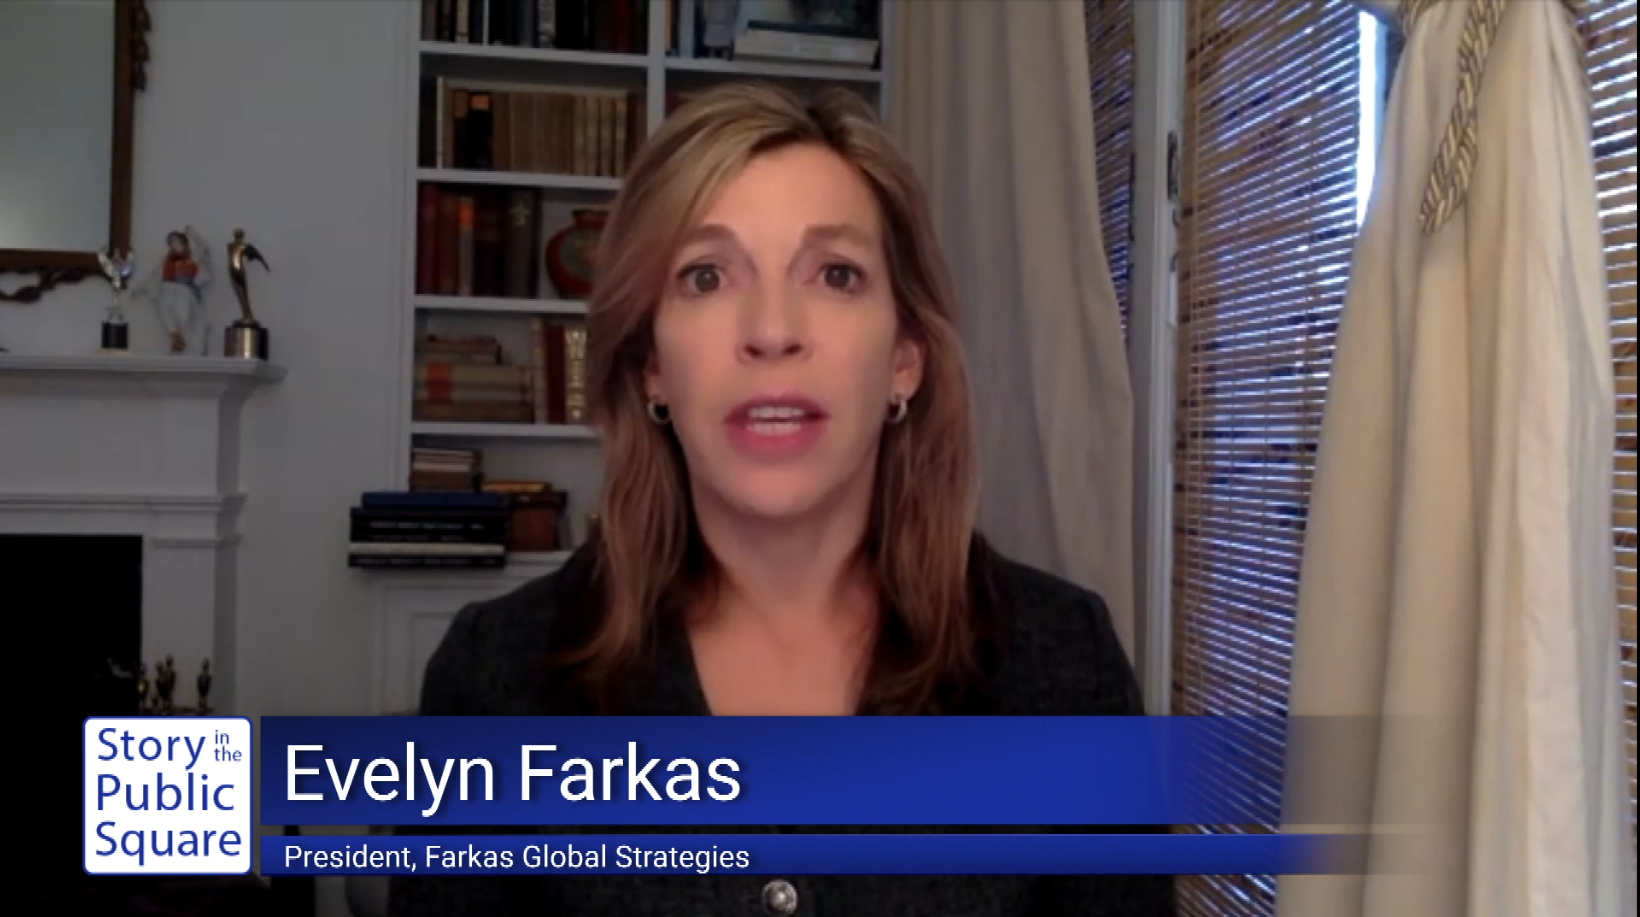 The 2021 Story of the Year with Dr. Evelyn Farkas